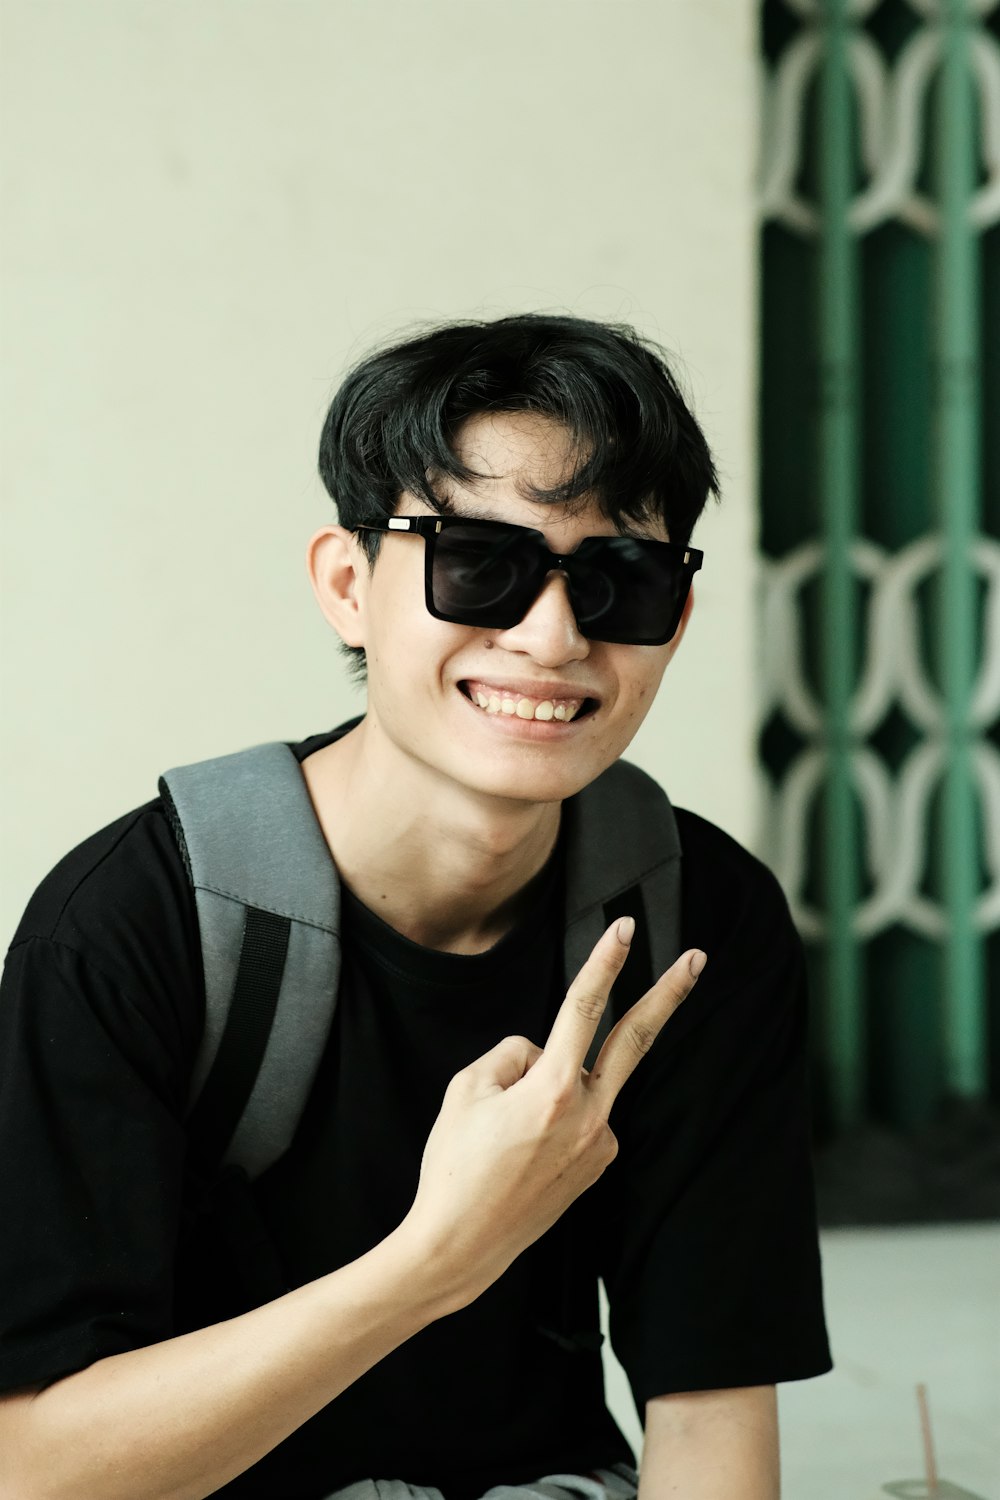 a young man wearing sunglasses and a black shirt